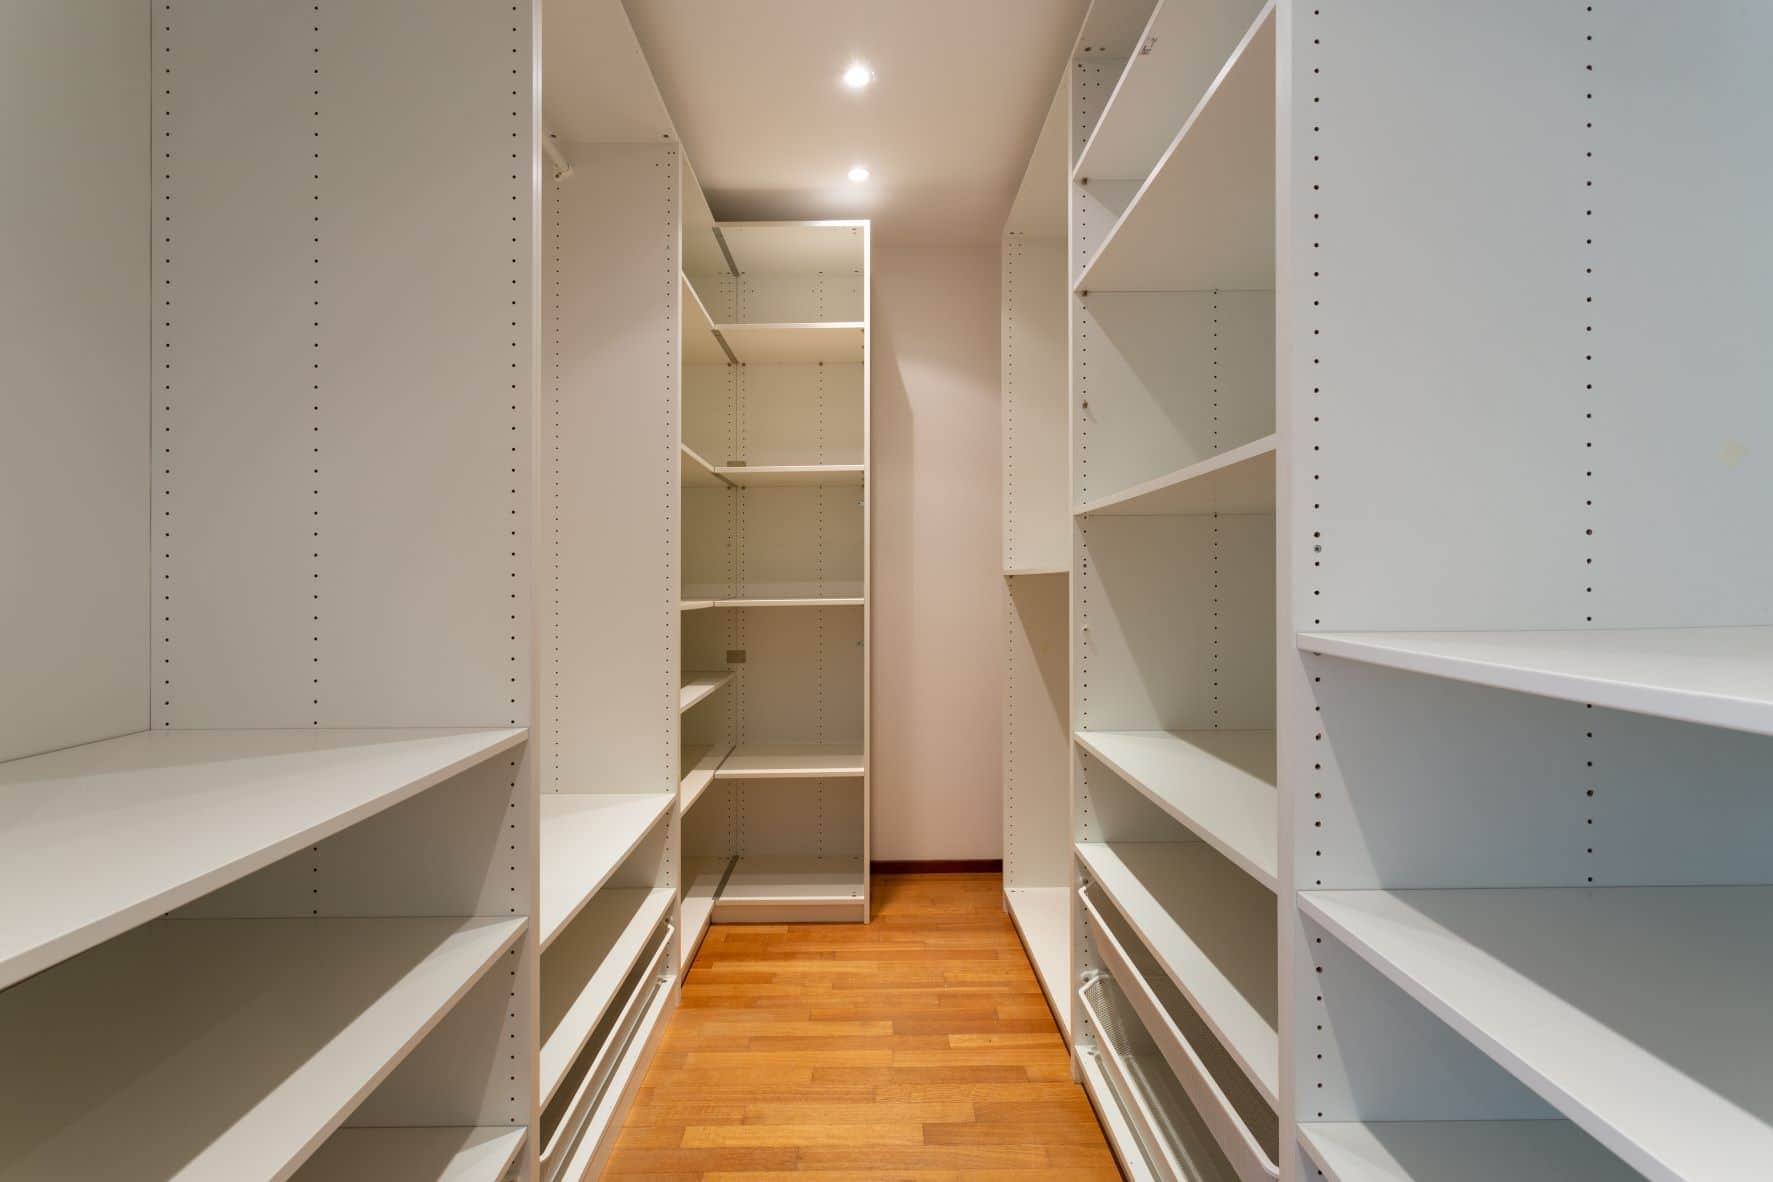 Large new walk-in closet with white shelving and wood flooring